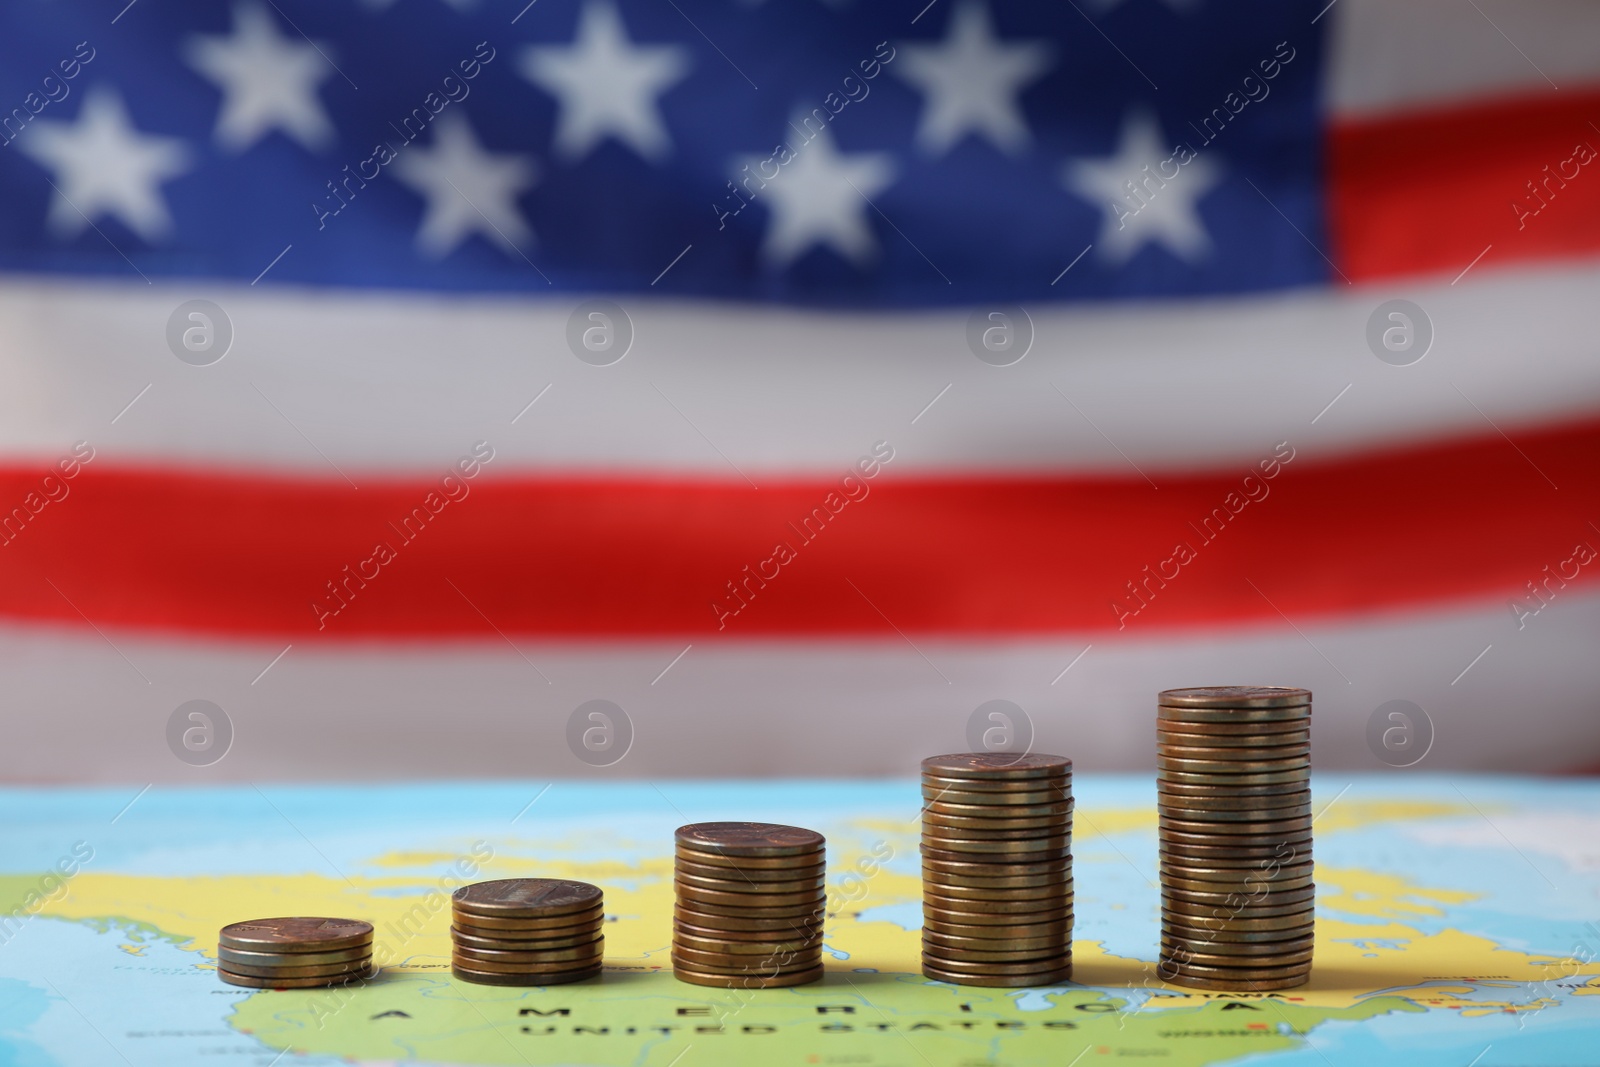 Photo of Stacks of USA cents on map against blurred flag